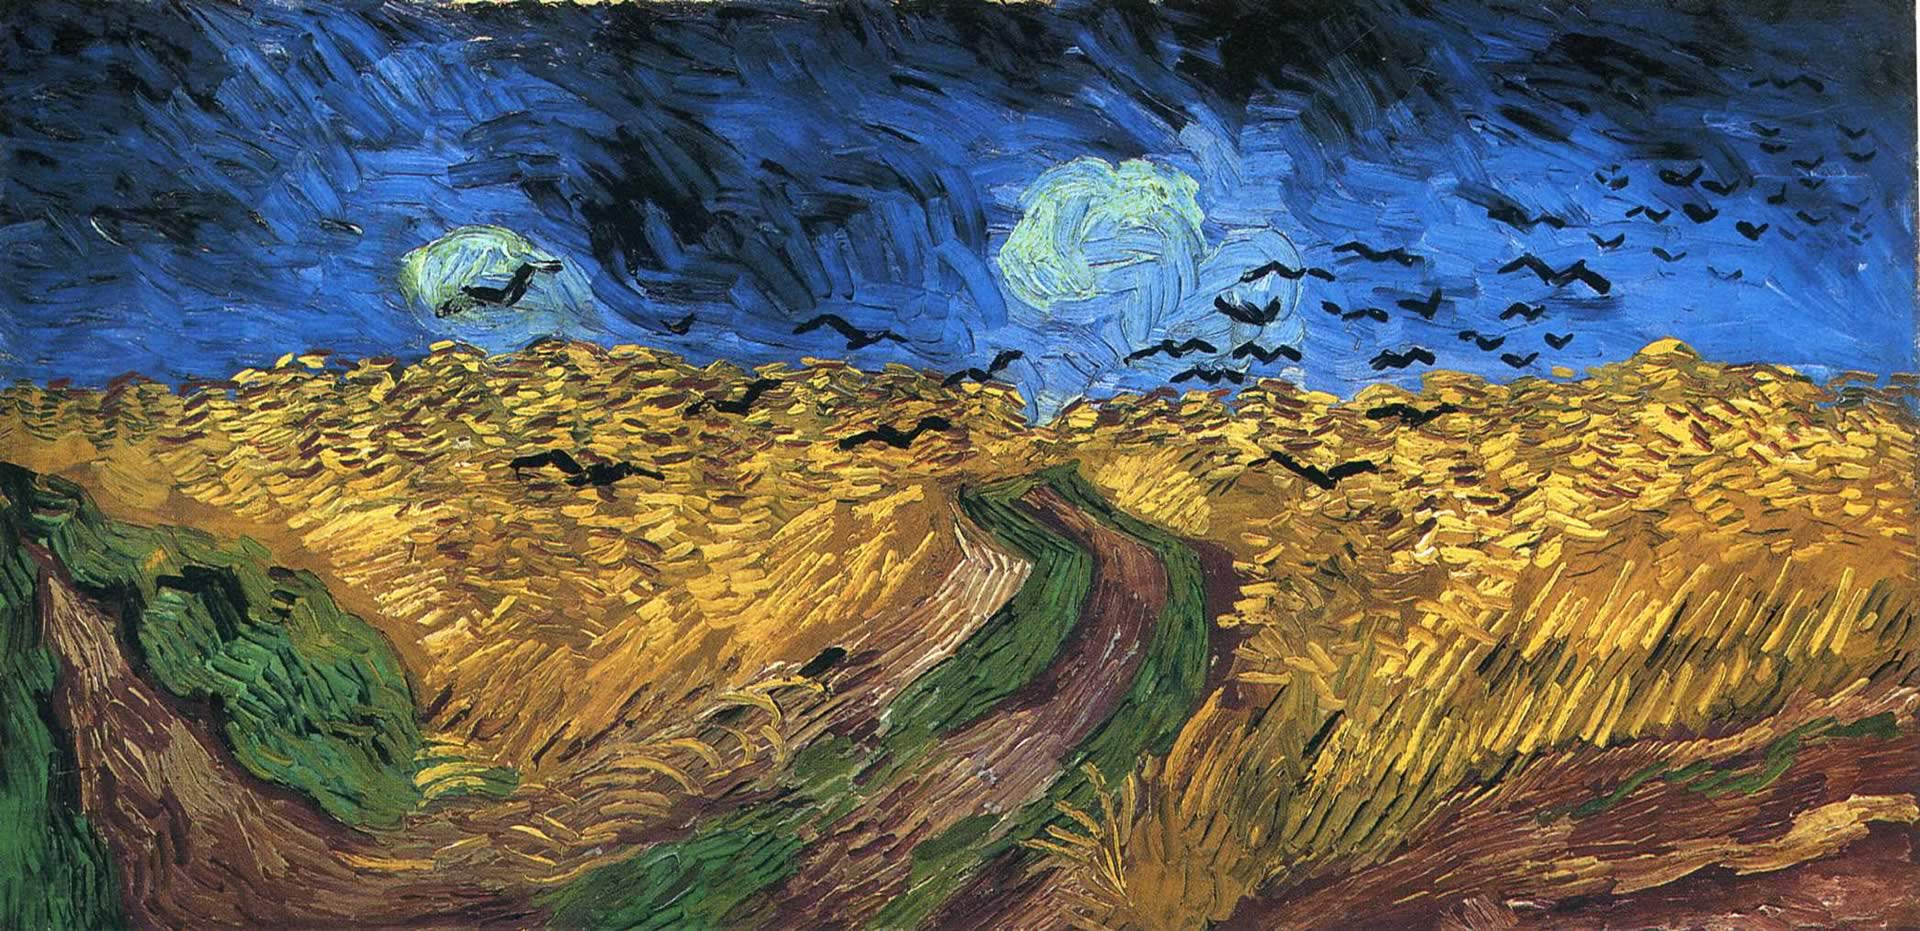 Wheatfield With Crows